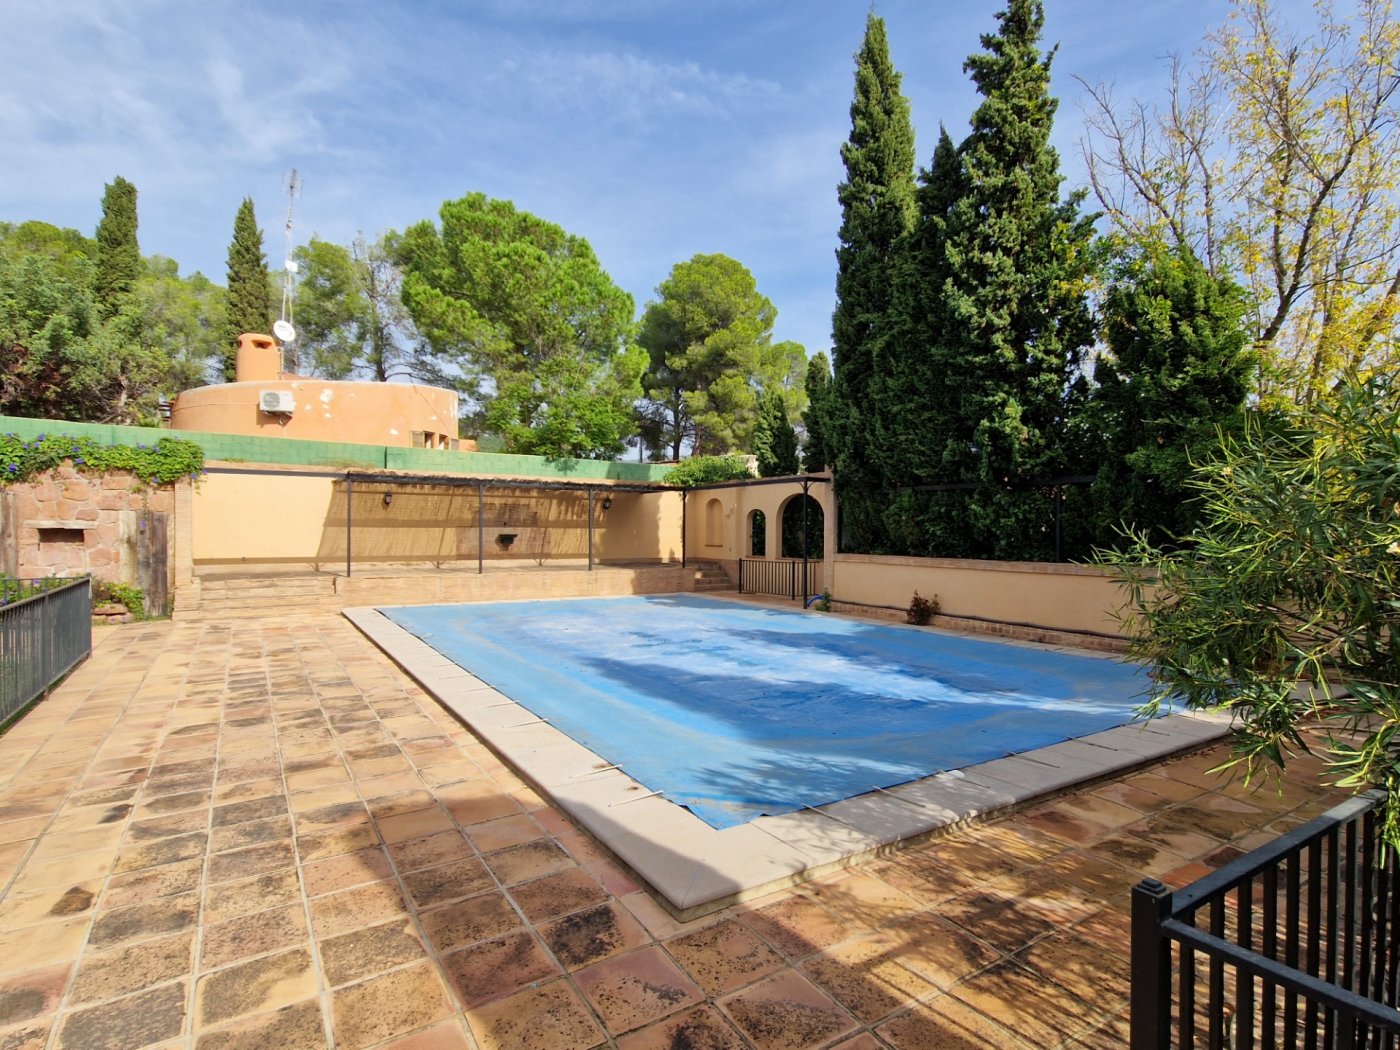 Villa for sale in Náquera, Valencia with large plot.